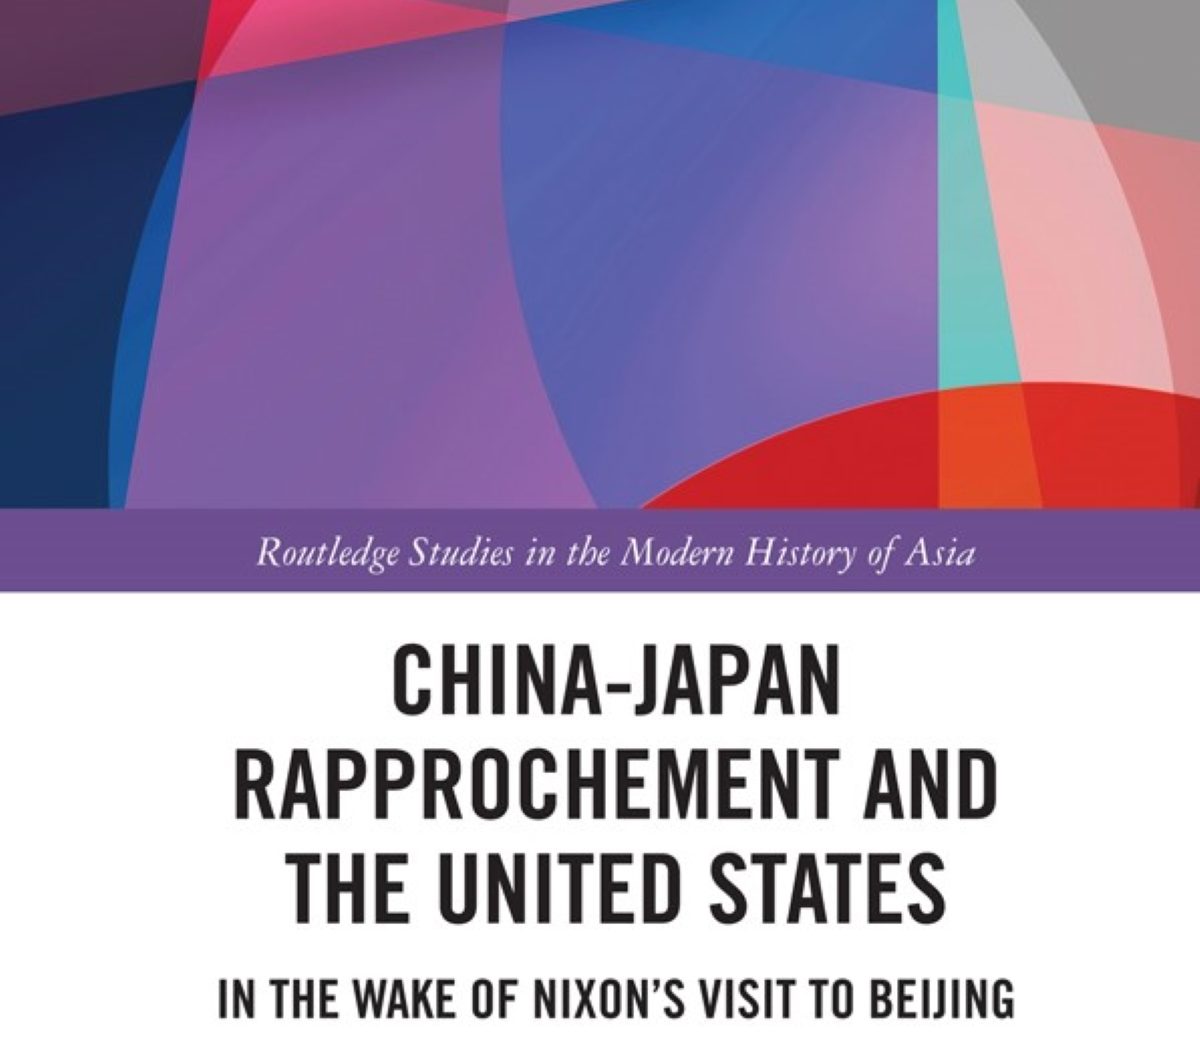 BOOK REVIEW By Ryuji Hattori, China-Japan Rapprochement and the United States in the Wake of Nixons Visit to Beijing JAPAN Forward